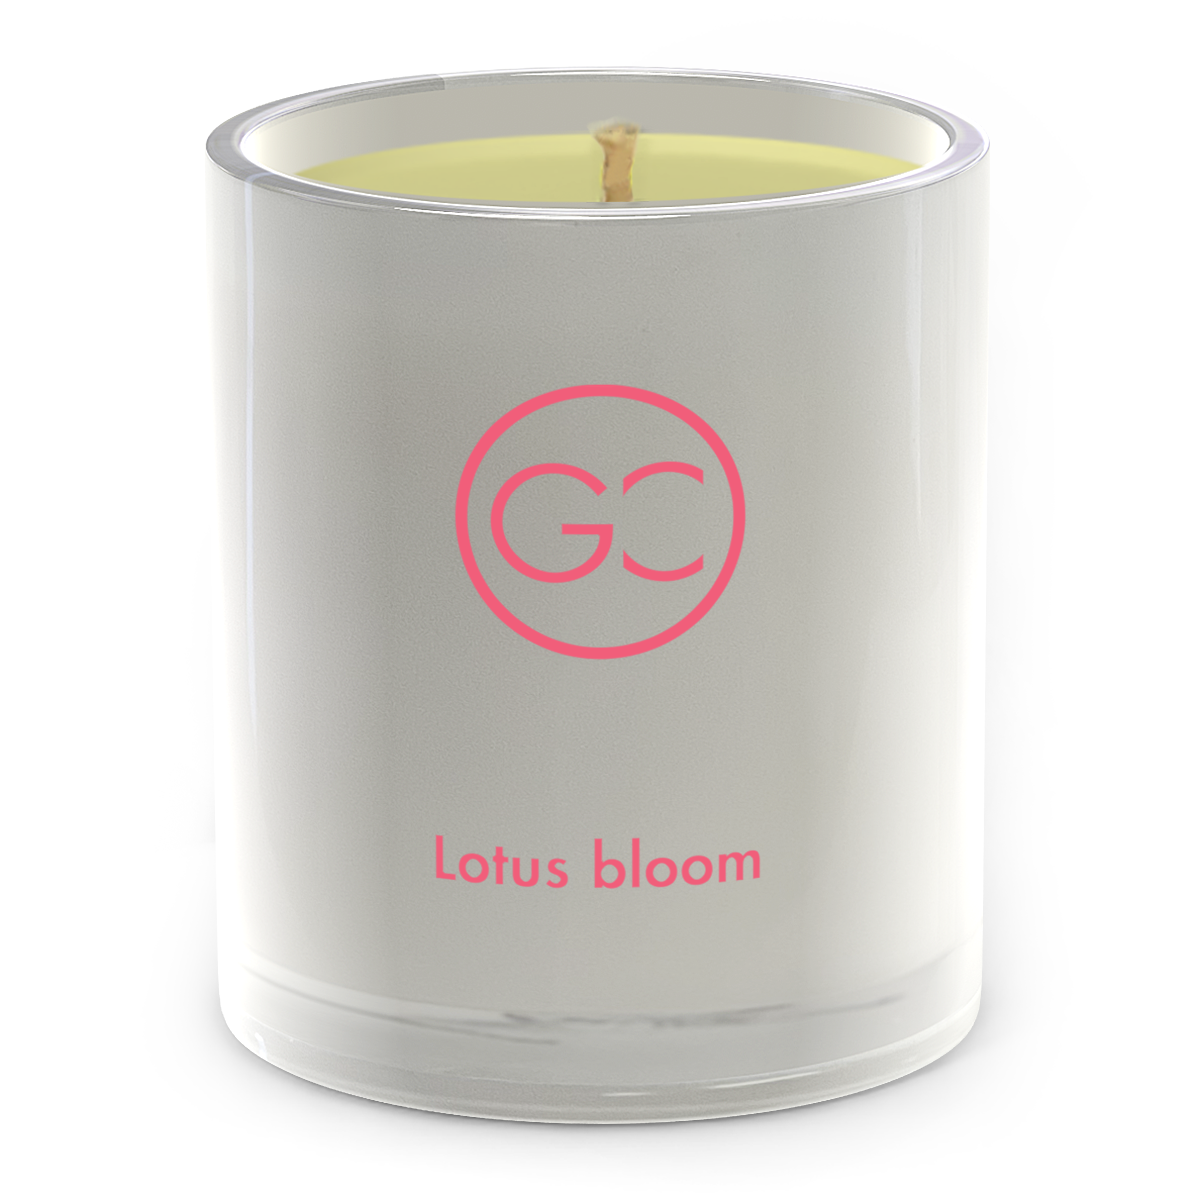 Lotus bloom Scented Soy Candle 55hr Burn